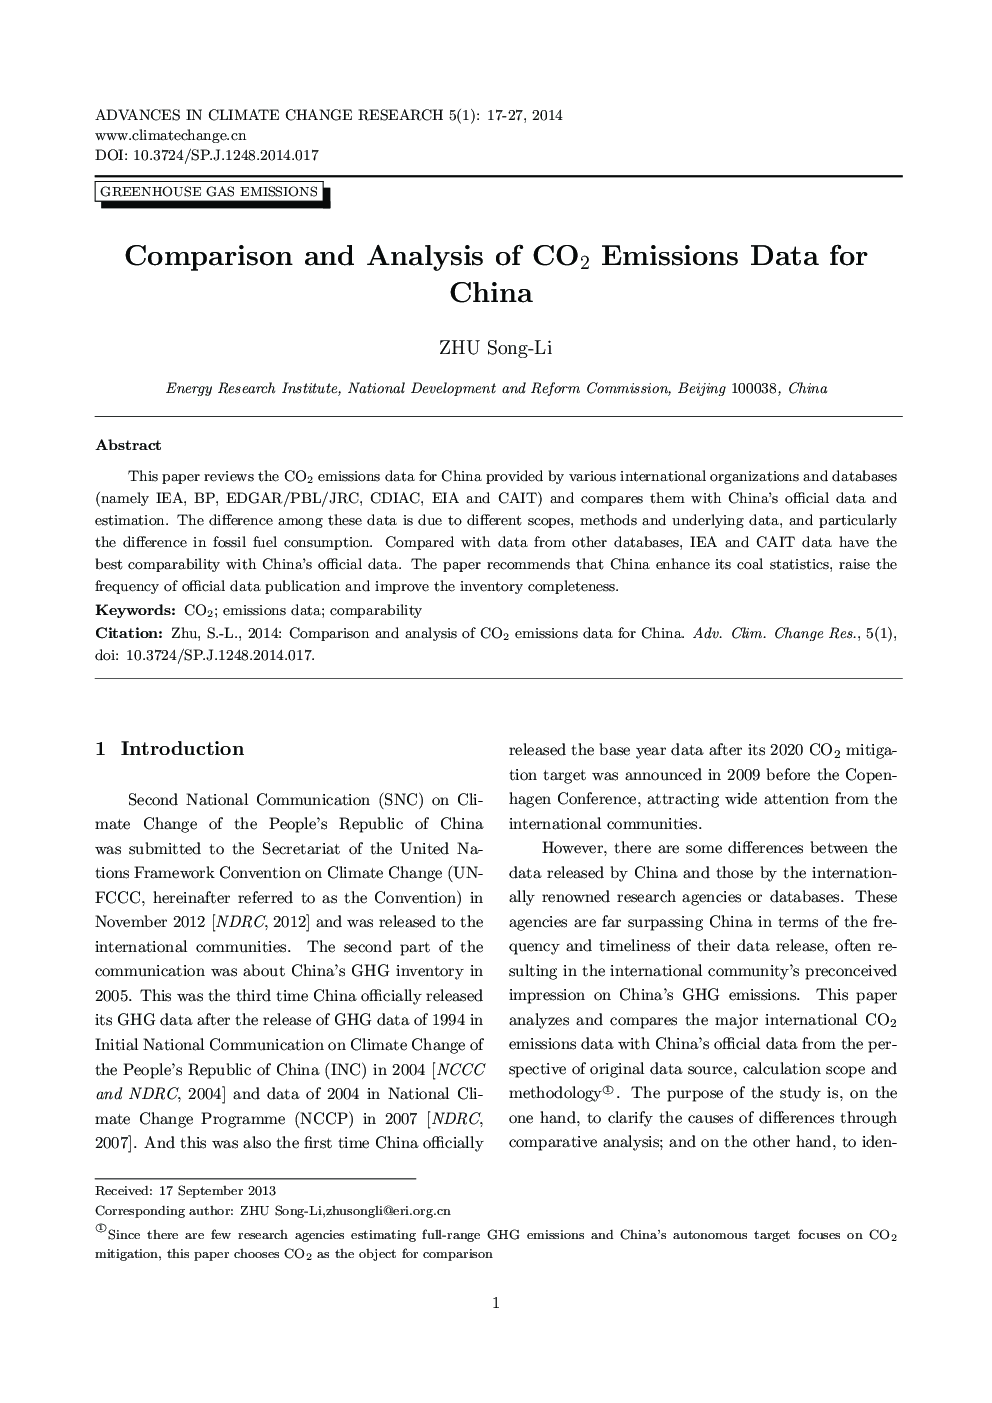 Comparison and Analysis of CO2 Emissions Data for China